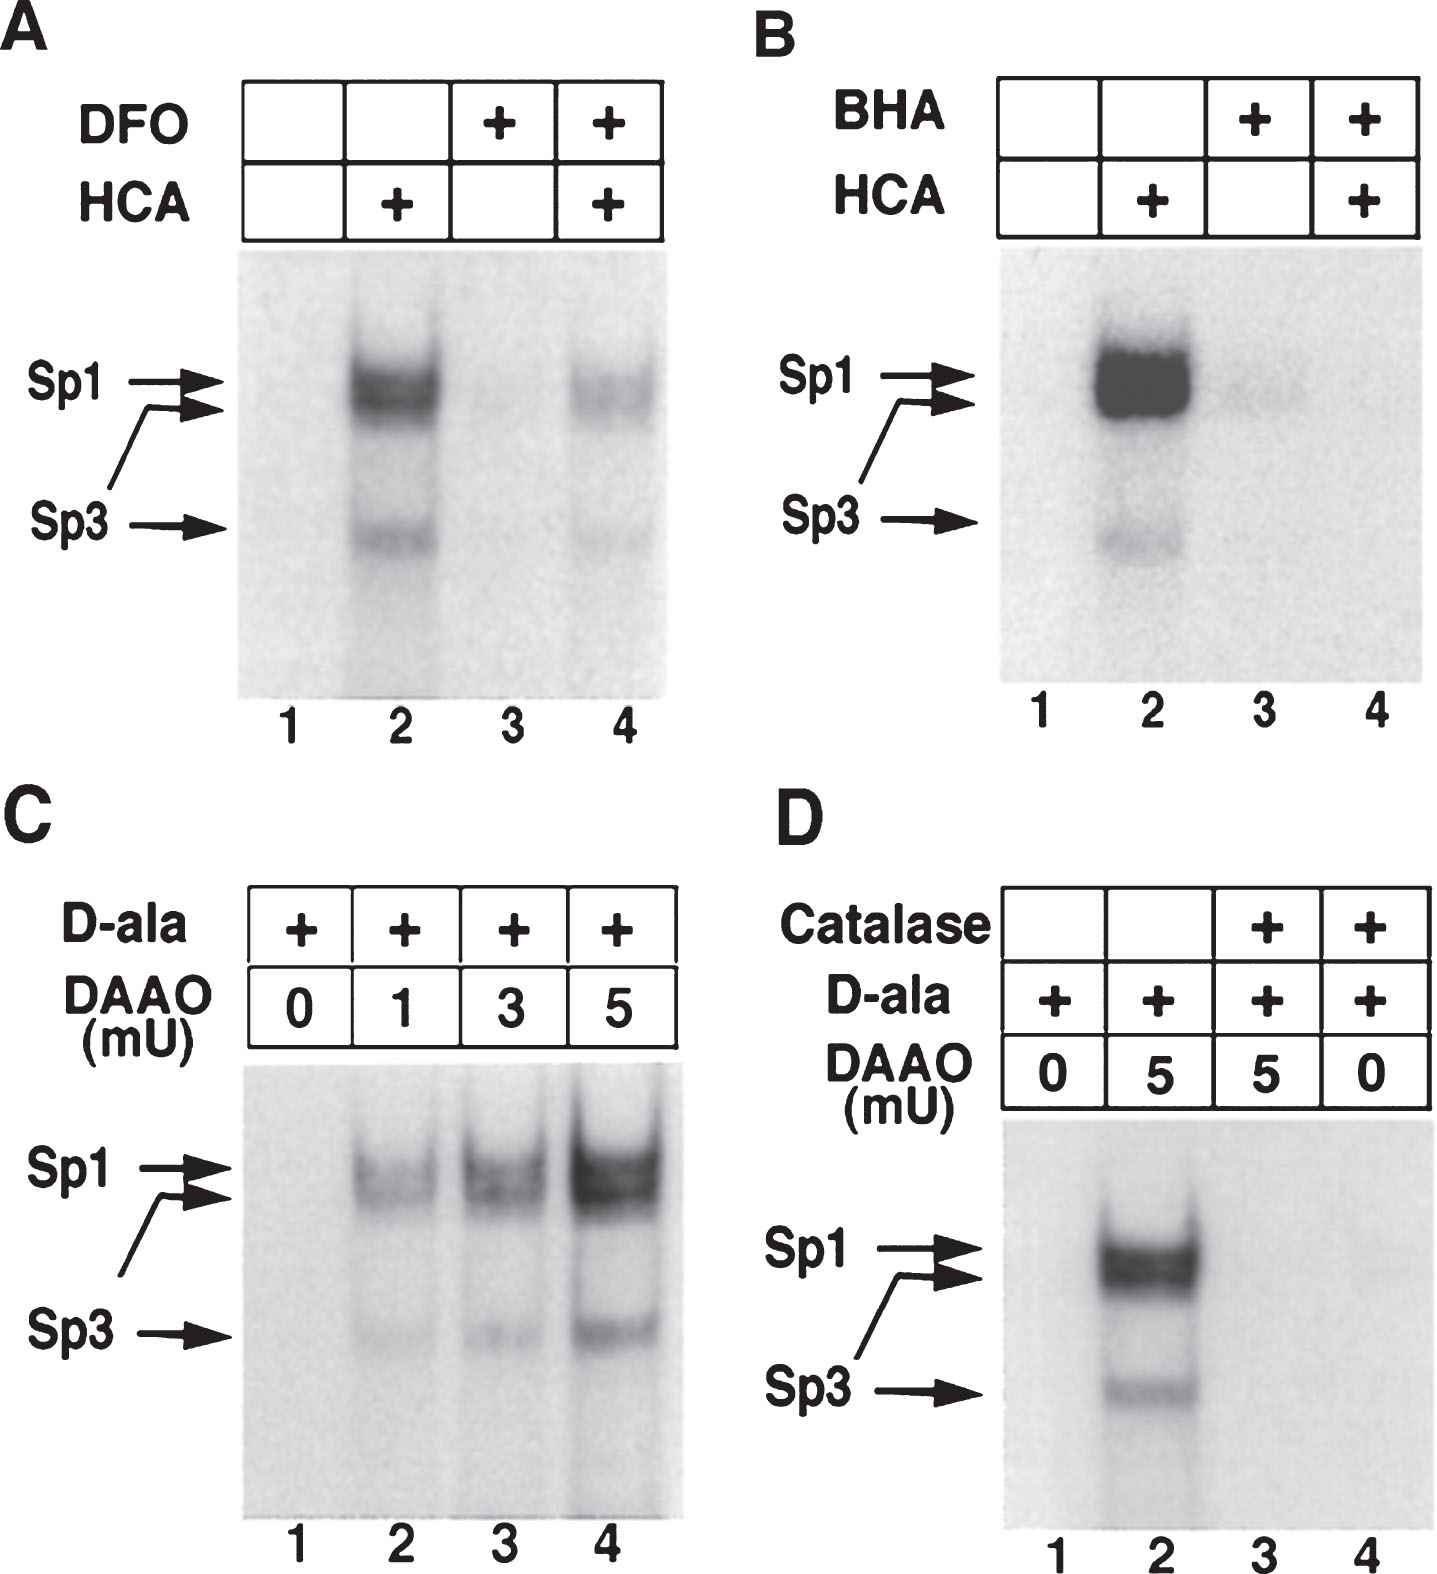 Increases in Sp1 and Sp3 DNA binding induced by the glutamate analog HCA are inhibited by antioxidants. Sp1 and Sp3 DNA binding in cortical neurons are activated by hydrogen peroxide. Induction of Sp1 and Sp3 DNA binding by HCA-induced glutathione depletion (4 hr) is decreased by the antioxidant iron chelator DFO (100 μm; A) and the lipid peroxidation inhibitor BHA (10 μm; B). C, Addition of exogenous peroxide, generated by the enzyme DAAO and its substrate d-ala (20 mm) for 4 hr increases Sp1 and Sp3 DNA binding in a concentration-dependent manner in cortical neurons. The induction is observed despite no morphological or biochemical evidence of cell death in cortical neurons. D, Addition of catalase abrogates Sp1 and Sp3 DNA binding induced by d-ala (20 mm) and DAAO (5 mU). Examples are representative of three to five independent experiments. (With permission from J. Neurosci.).